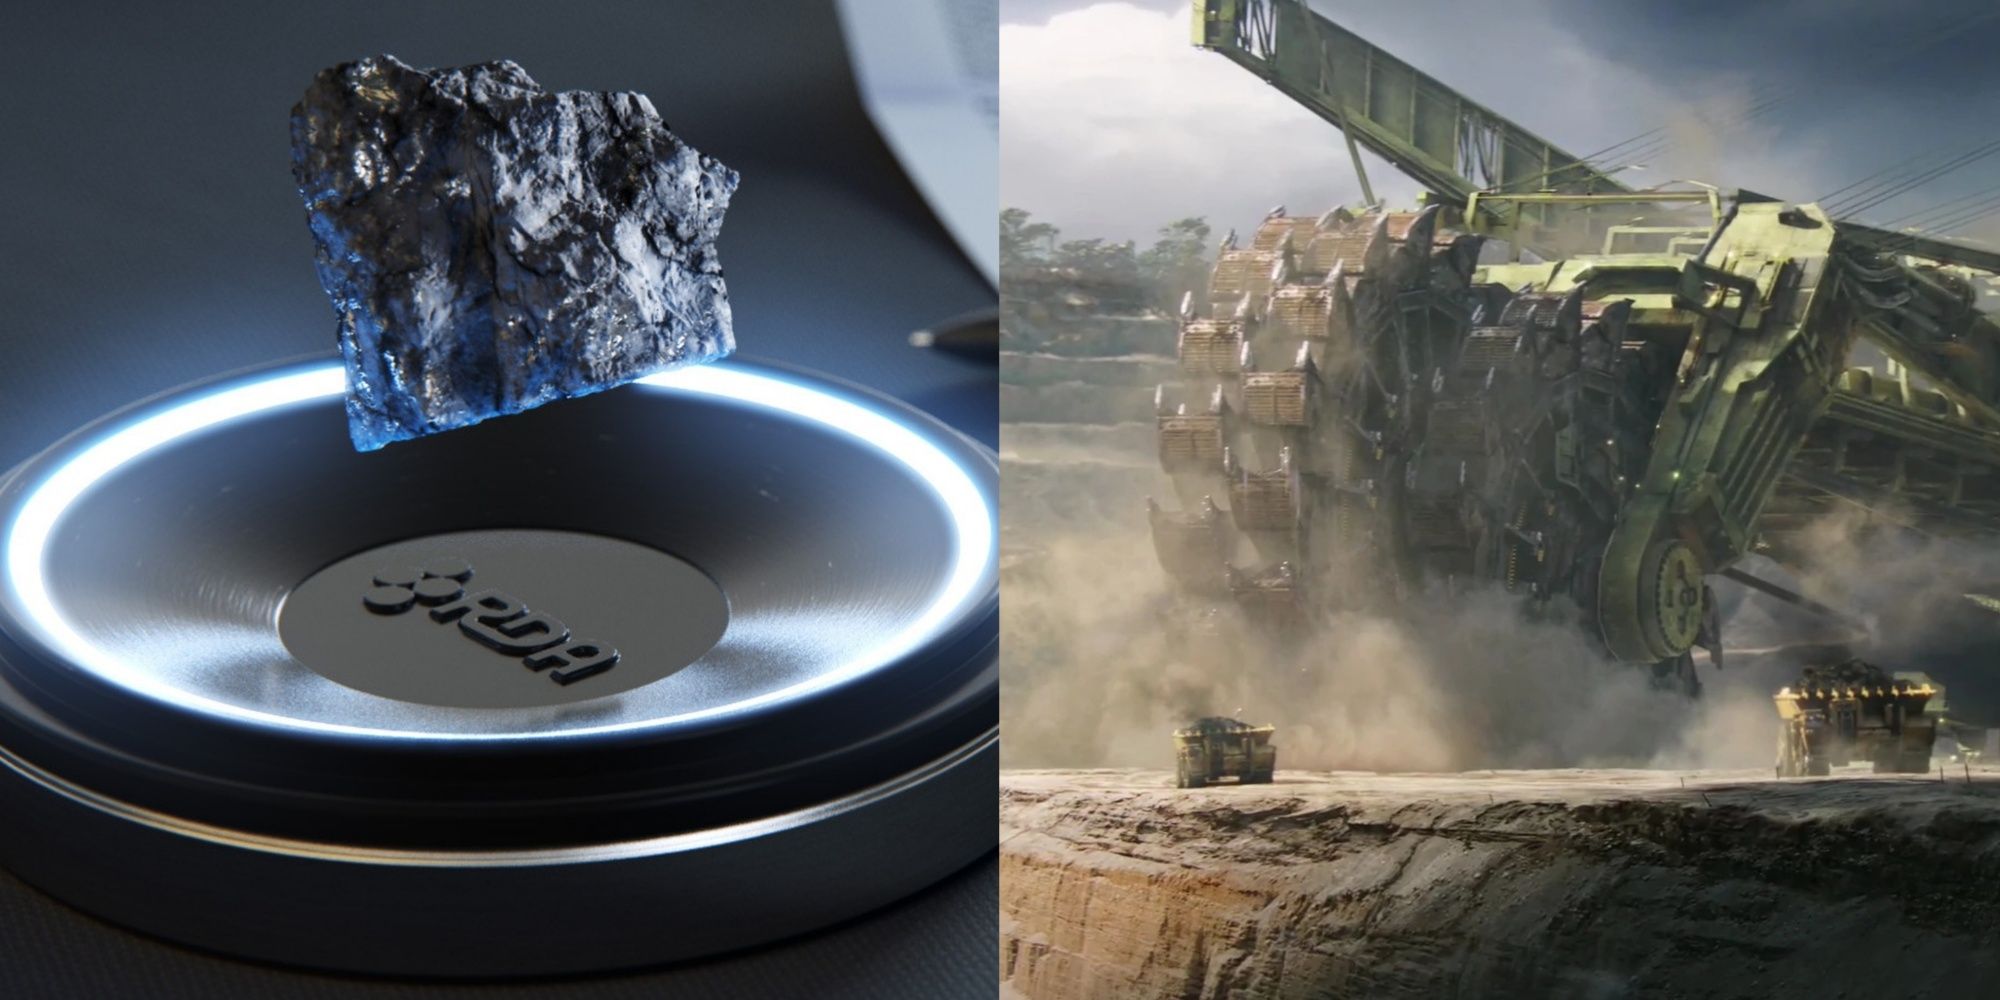 A collage showing Unobtanium Ore And An RDA Drilling Platform in Avatar.